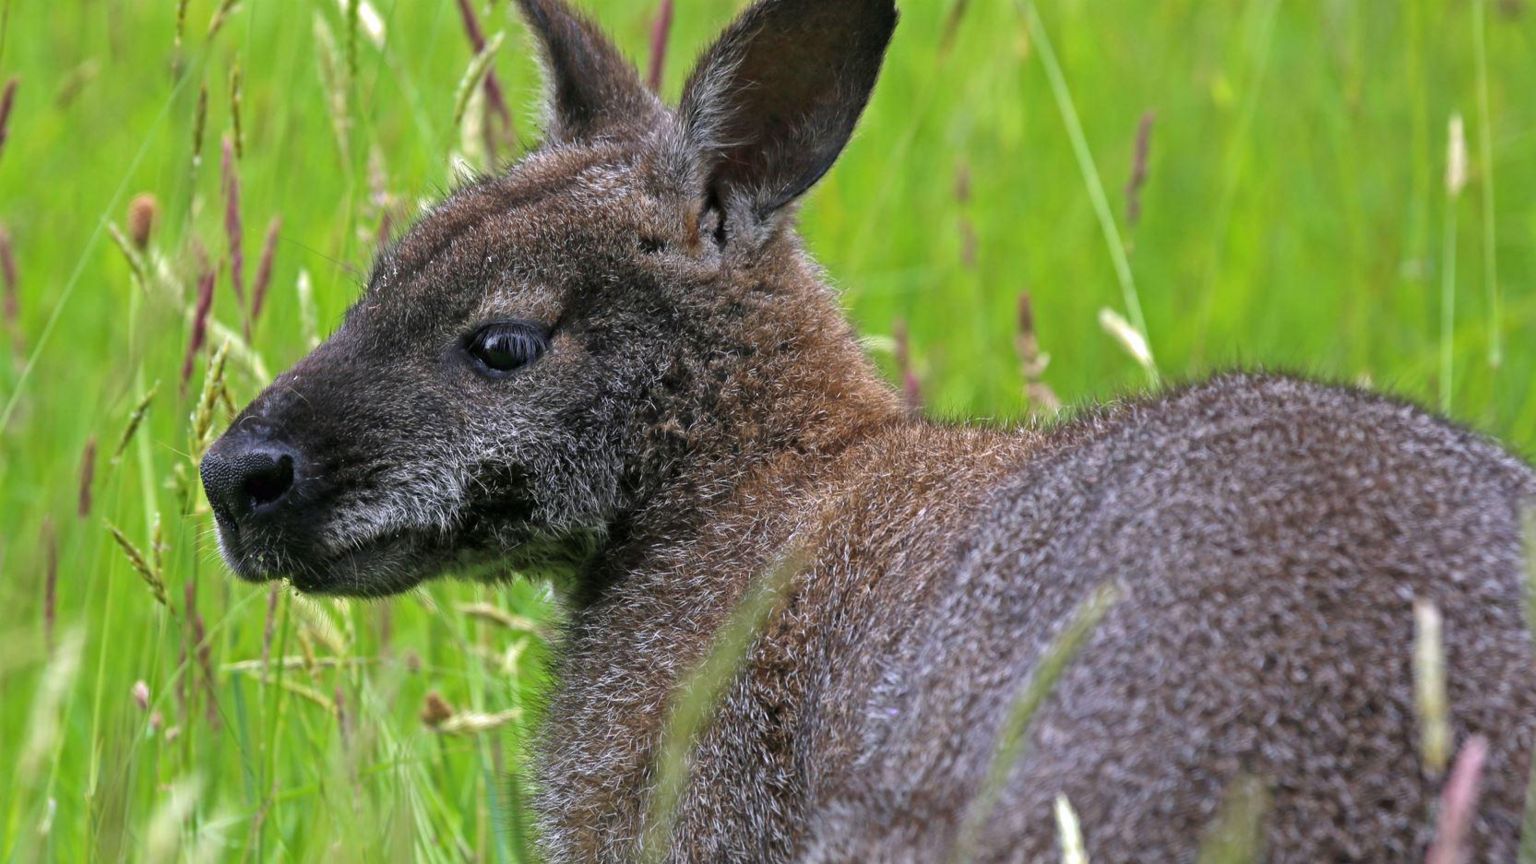 Wallaby in long grass